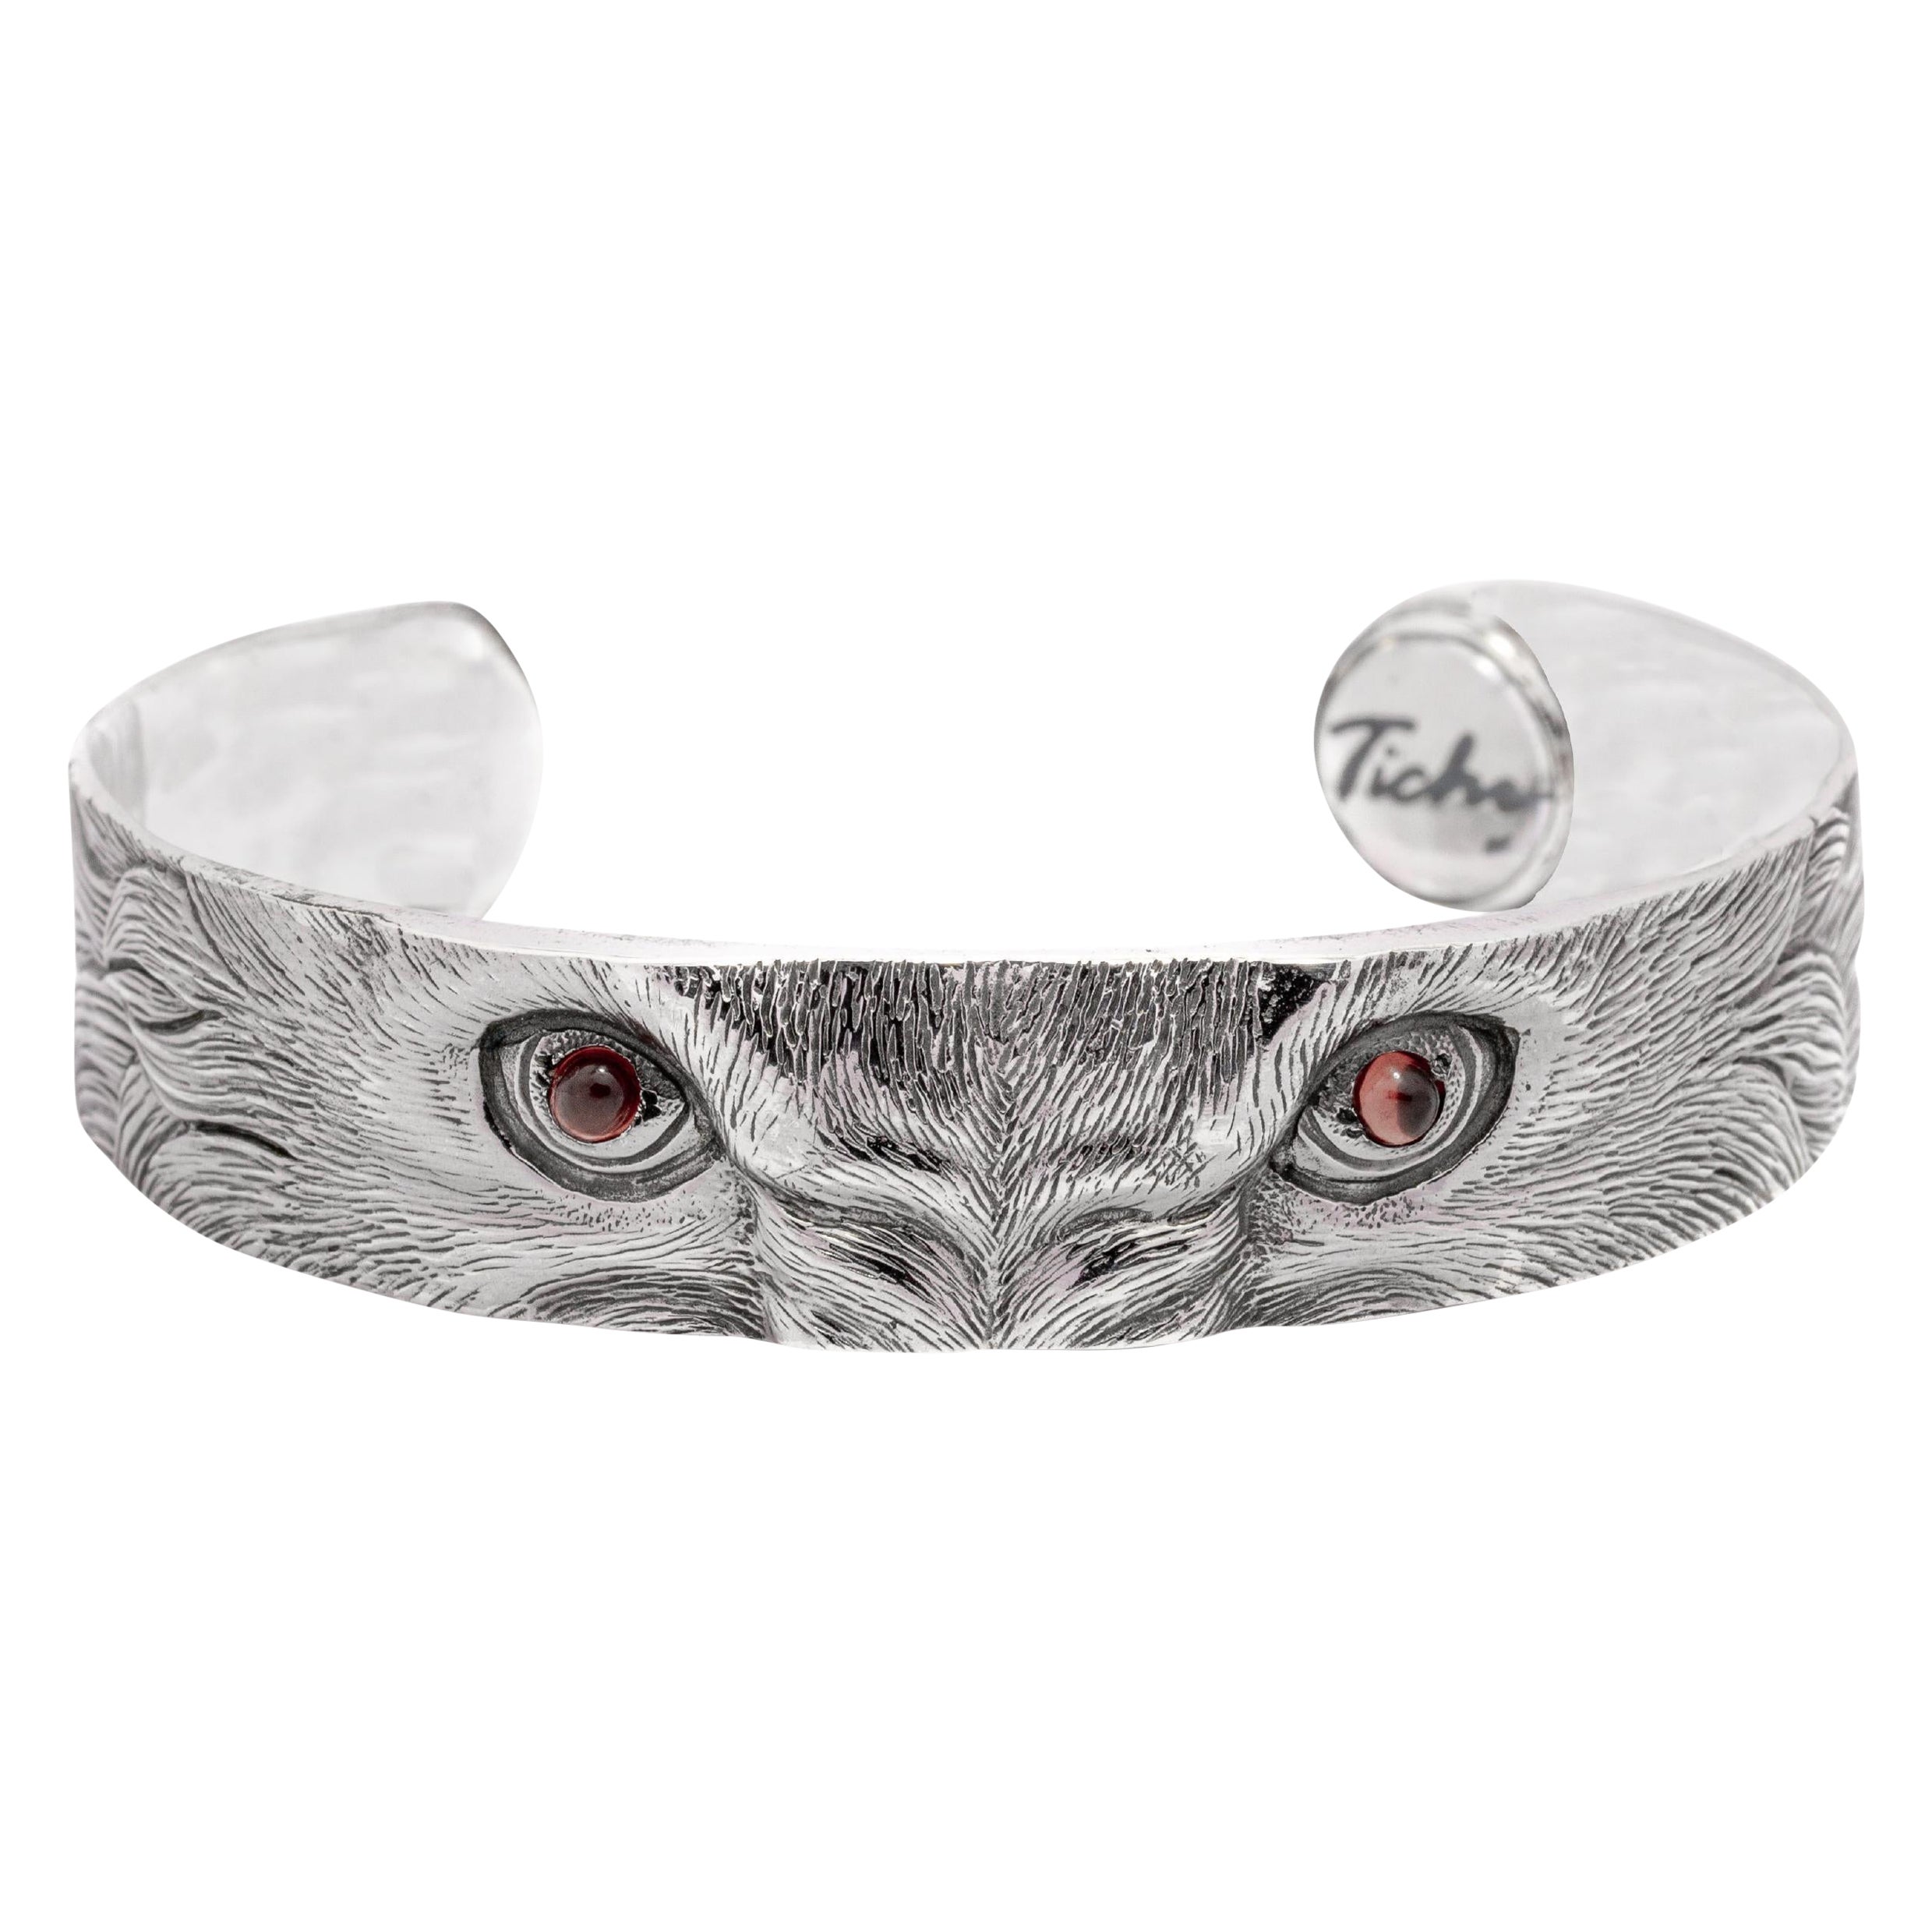 Tichu Citrine Lion Eyes Cuff in Sterling Silver and Crystal Quartz 'Size S'